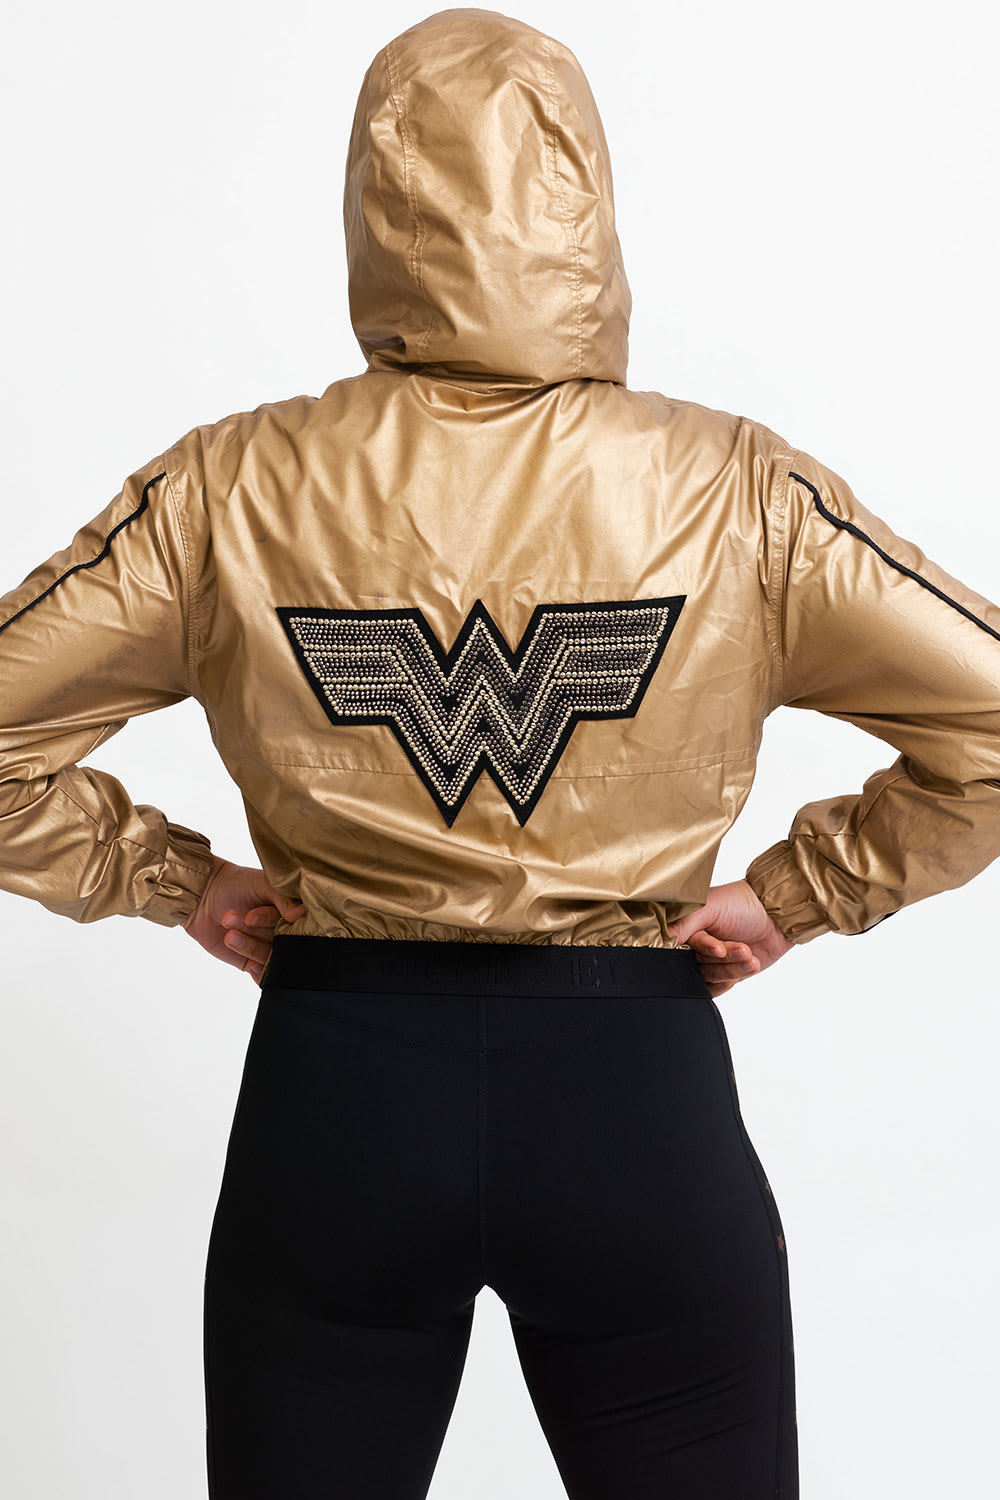 Venus Williams on New Wonder Woman-Inspired Collection